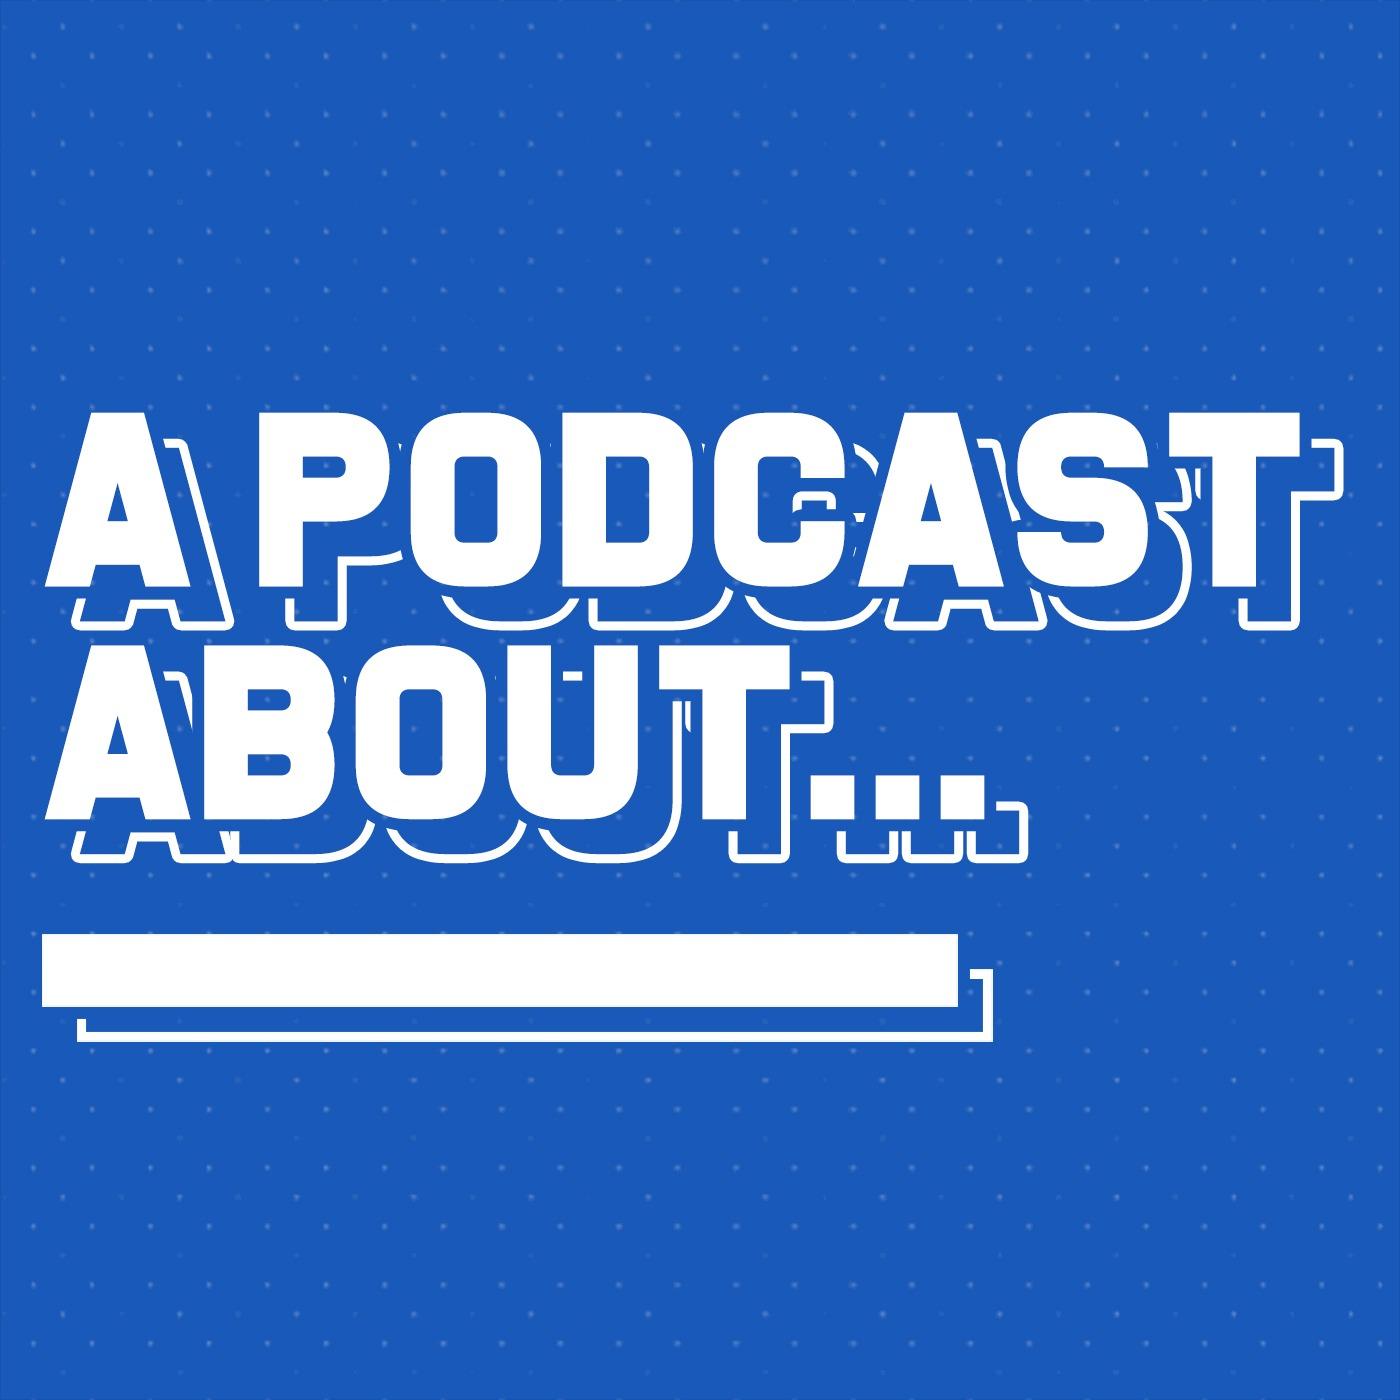 A Podcast About...